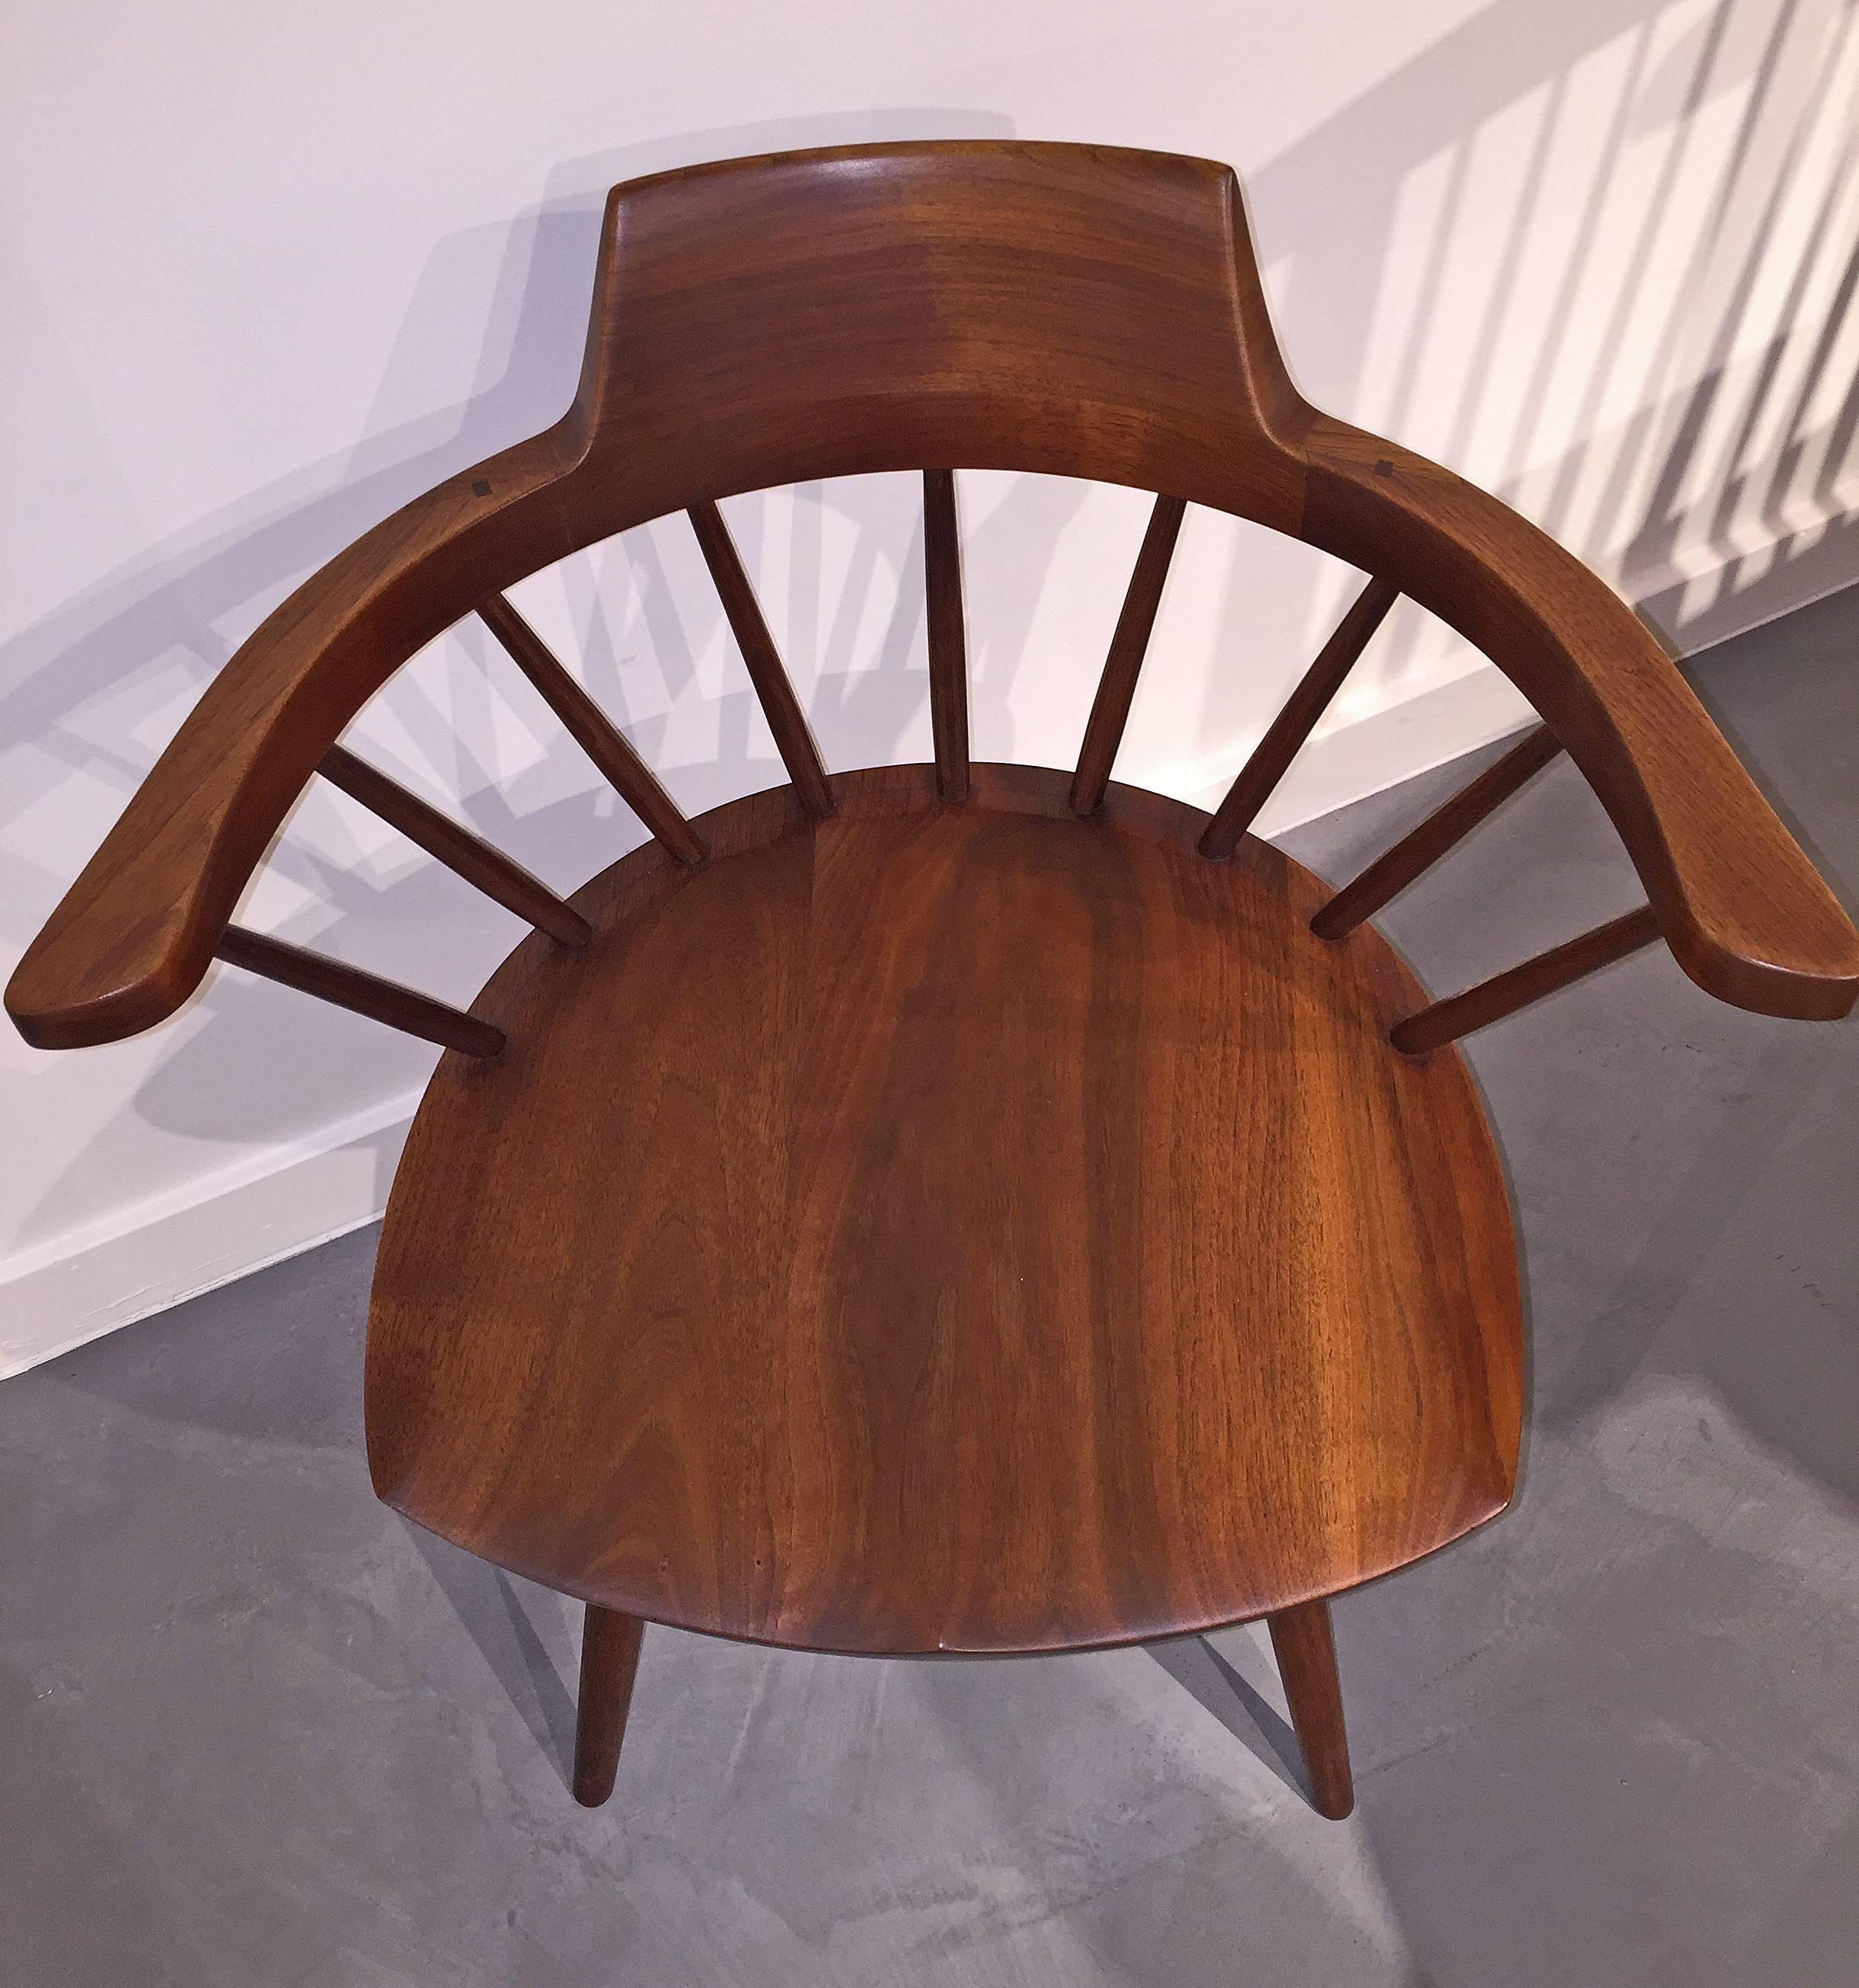 Captain’s chair by George Nakashima, 1970. American black walnut.